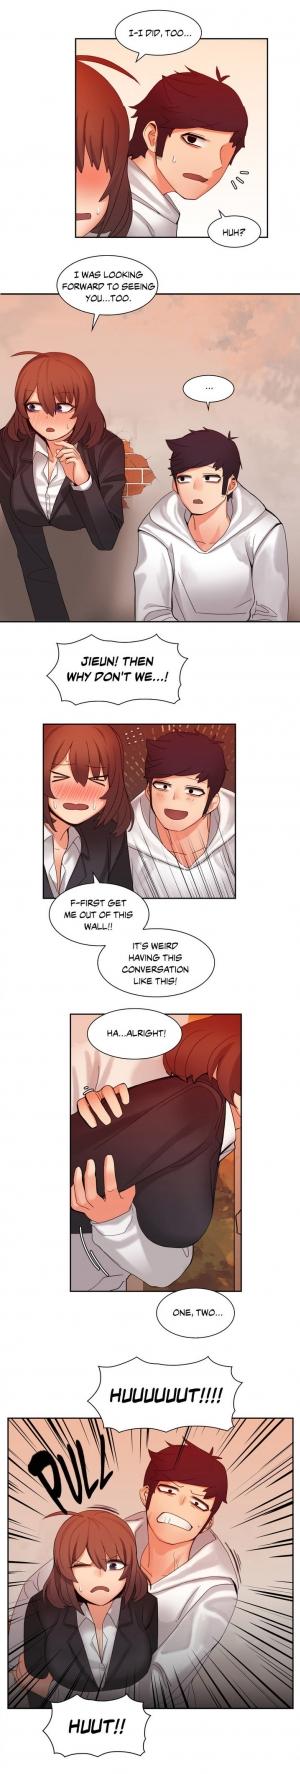 [Gaehoju, Gunnermul] The Girl That Got Stuck in the Wall Ch.11/11 [COMPLETED] [English] [Hentai Universe] - Page 113